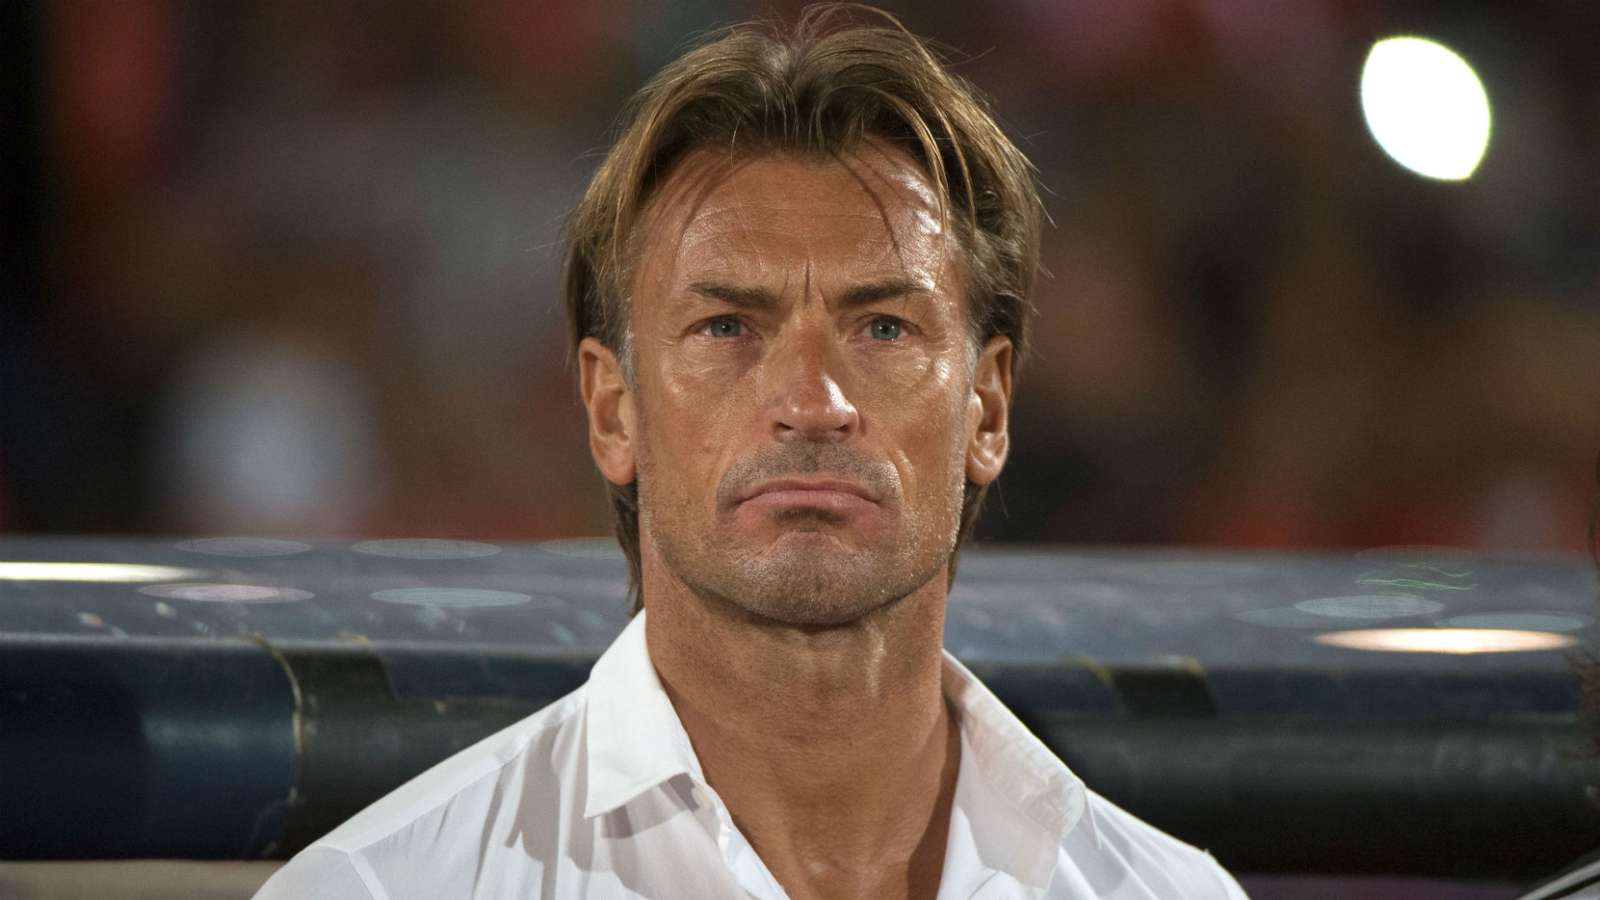 Ghana cannot afford $100,000 per-month Herve Renard to take charge